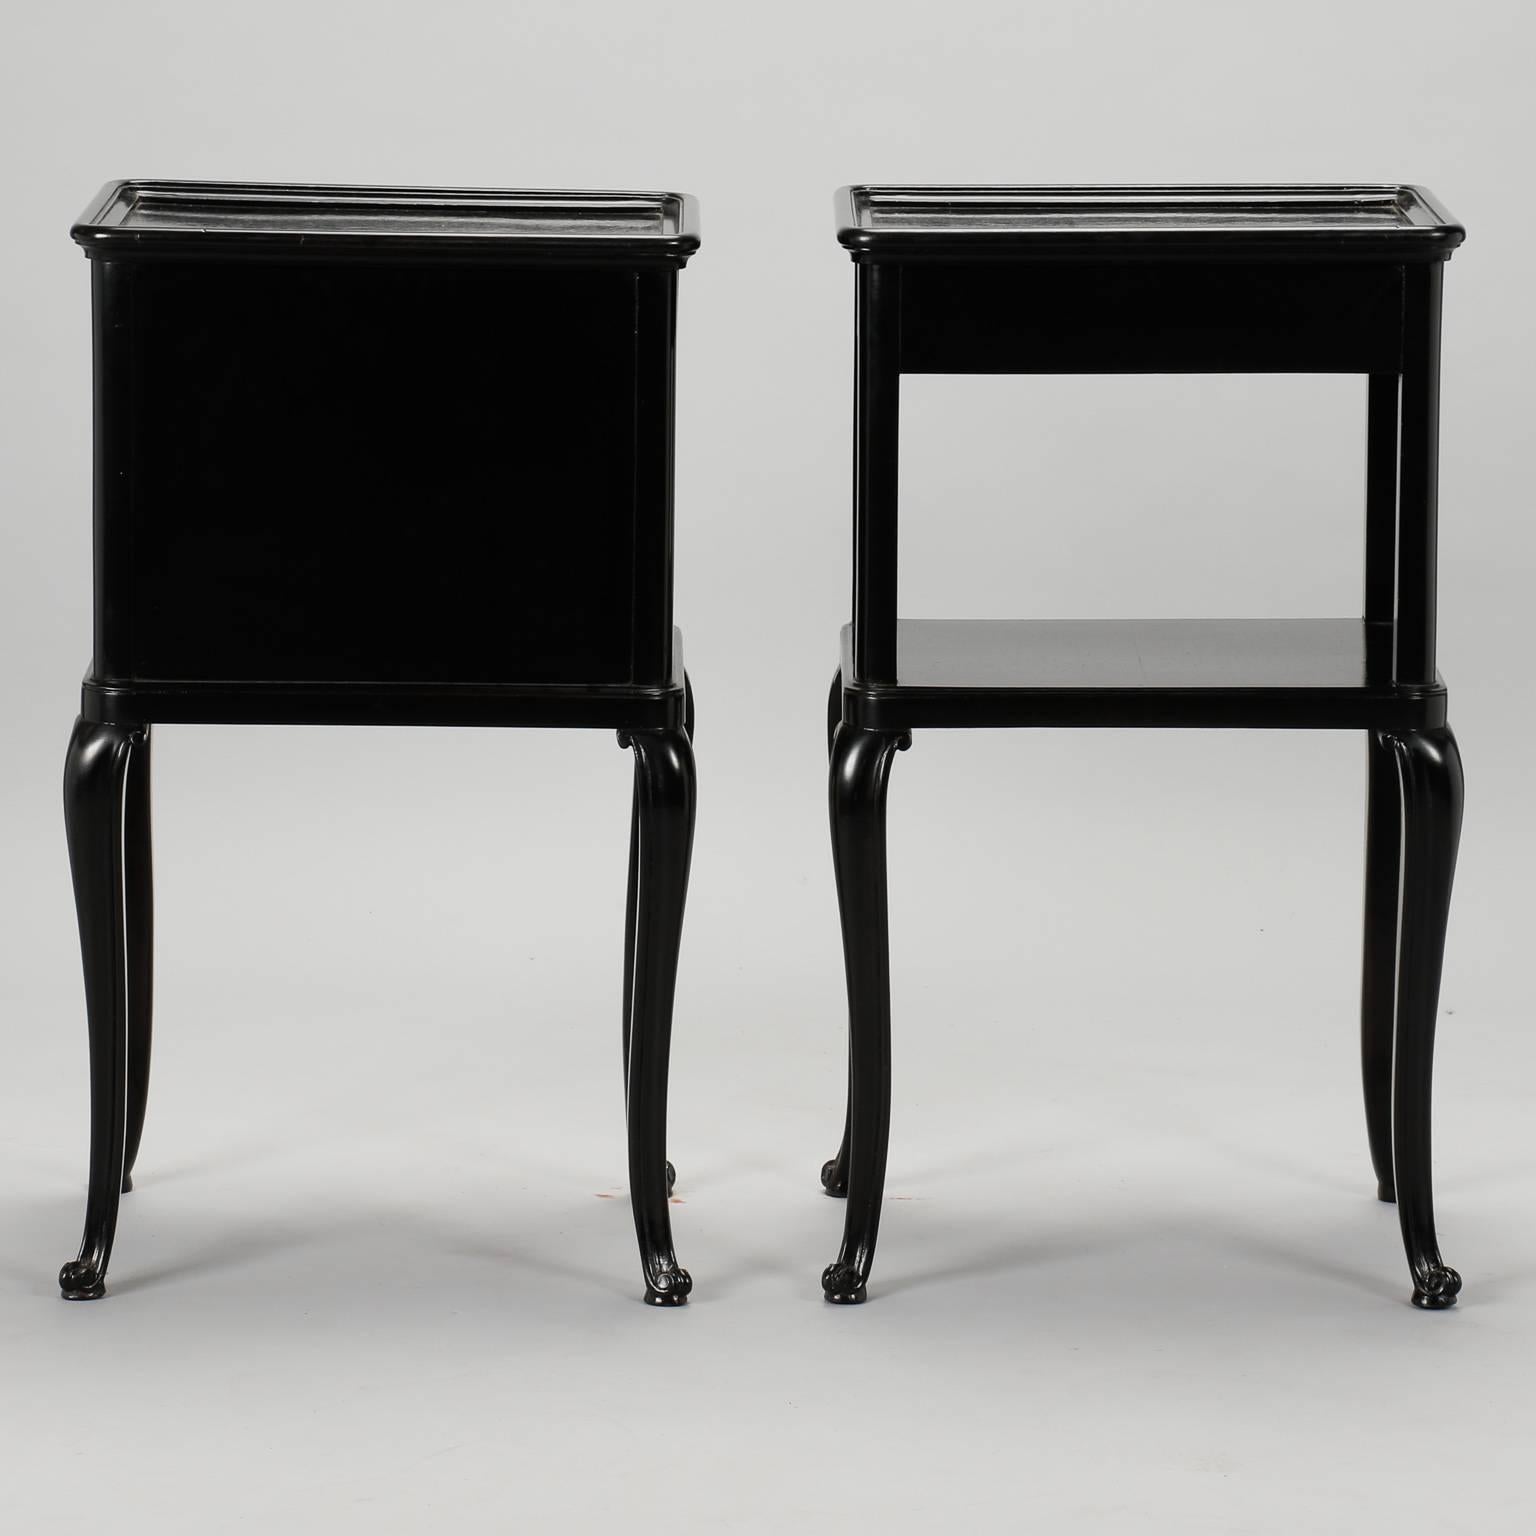 Pair of circa 1930s slender Art Deco side tables found in France with new ebonized finish. Side tables are the same size with slender cabriole legs, silver tone hardware. One table has a hinged cabinet and drawer while the other has a lower shelf,